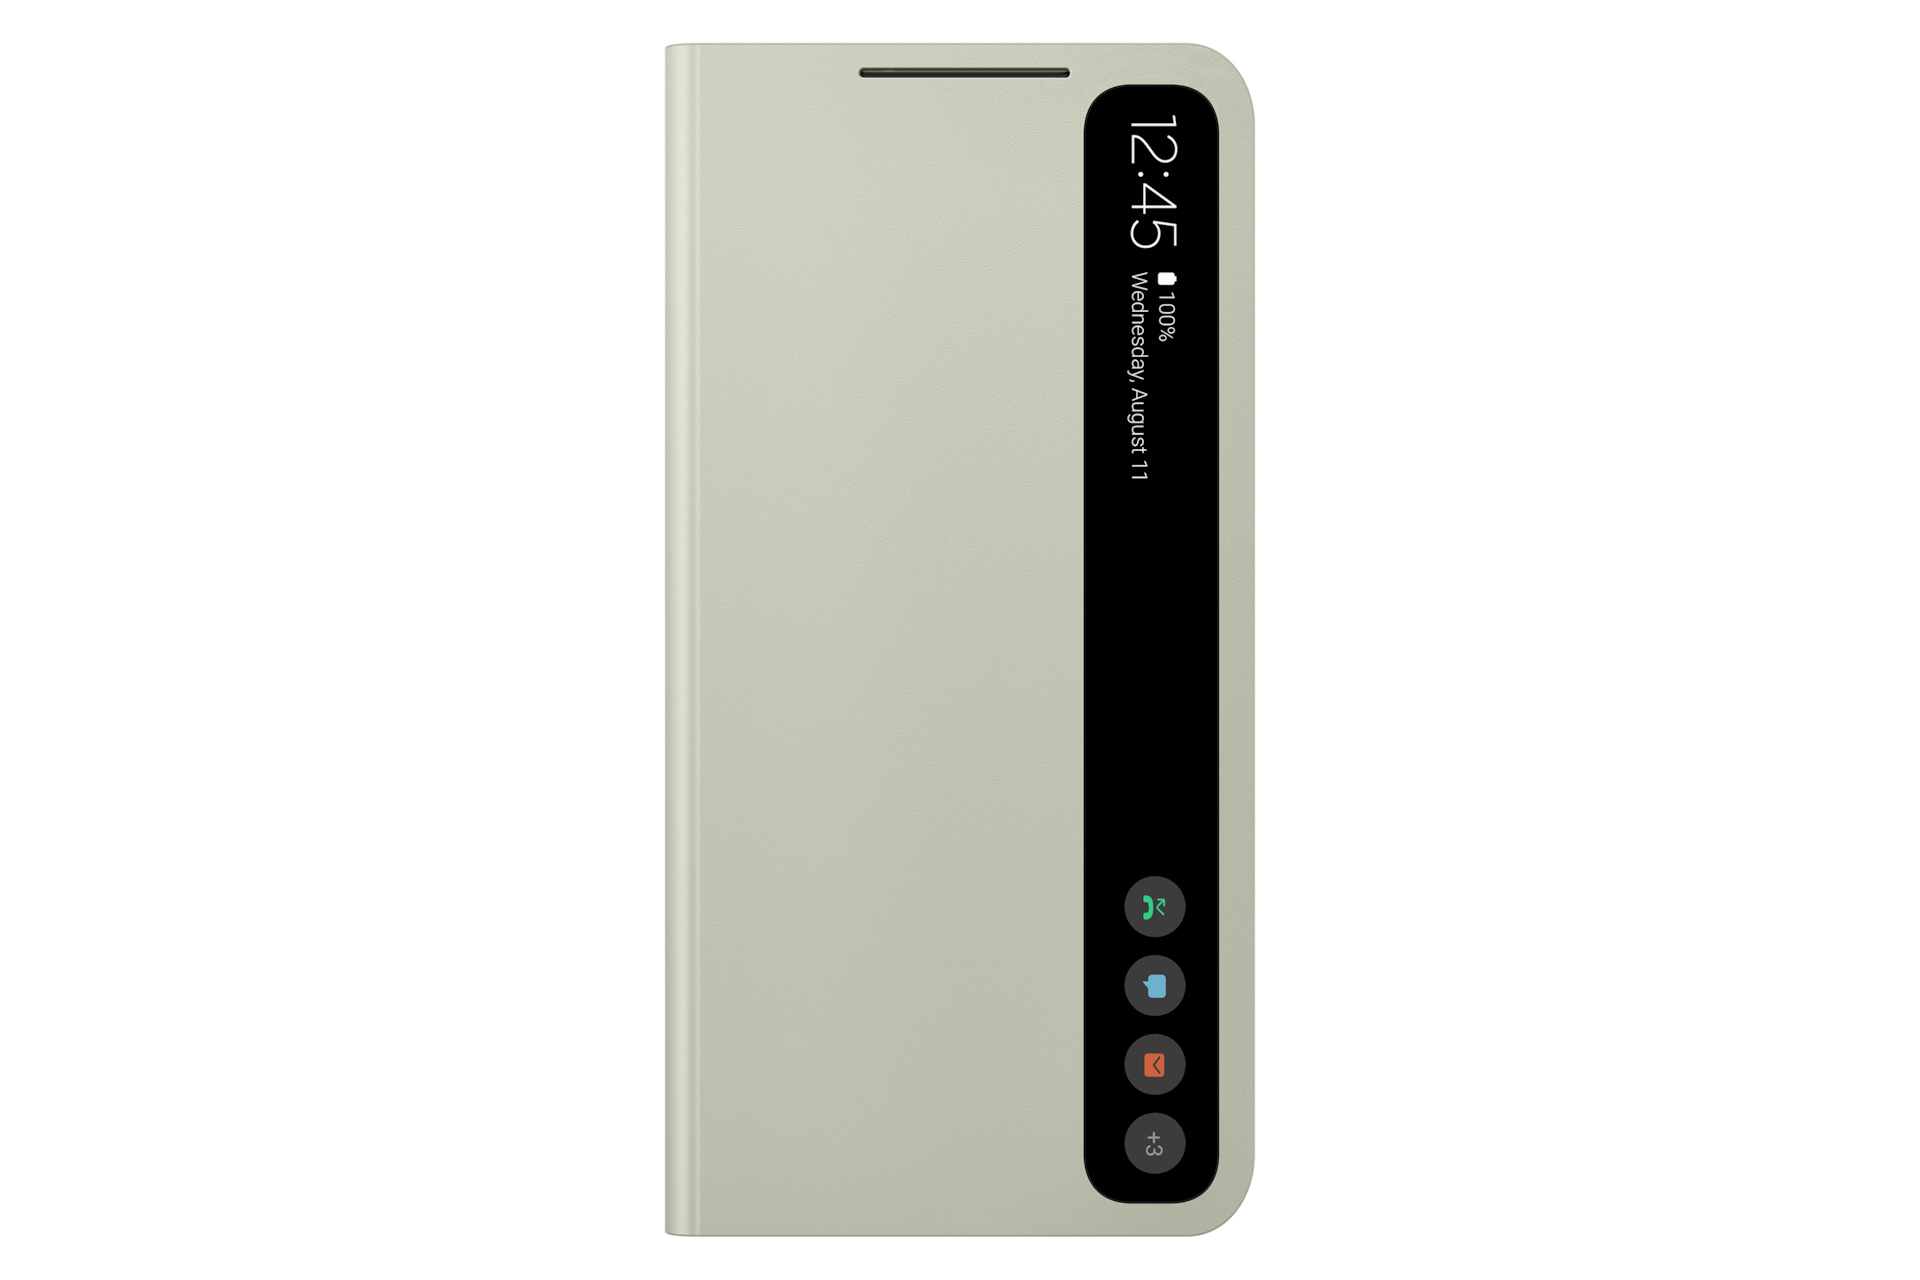 S21 FE Smart Clear View Cover Olive